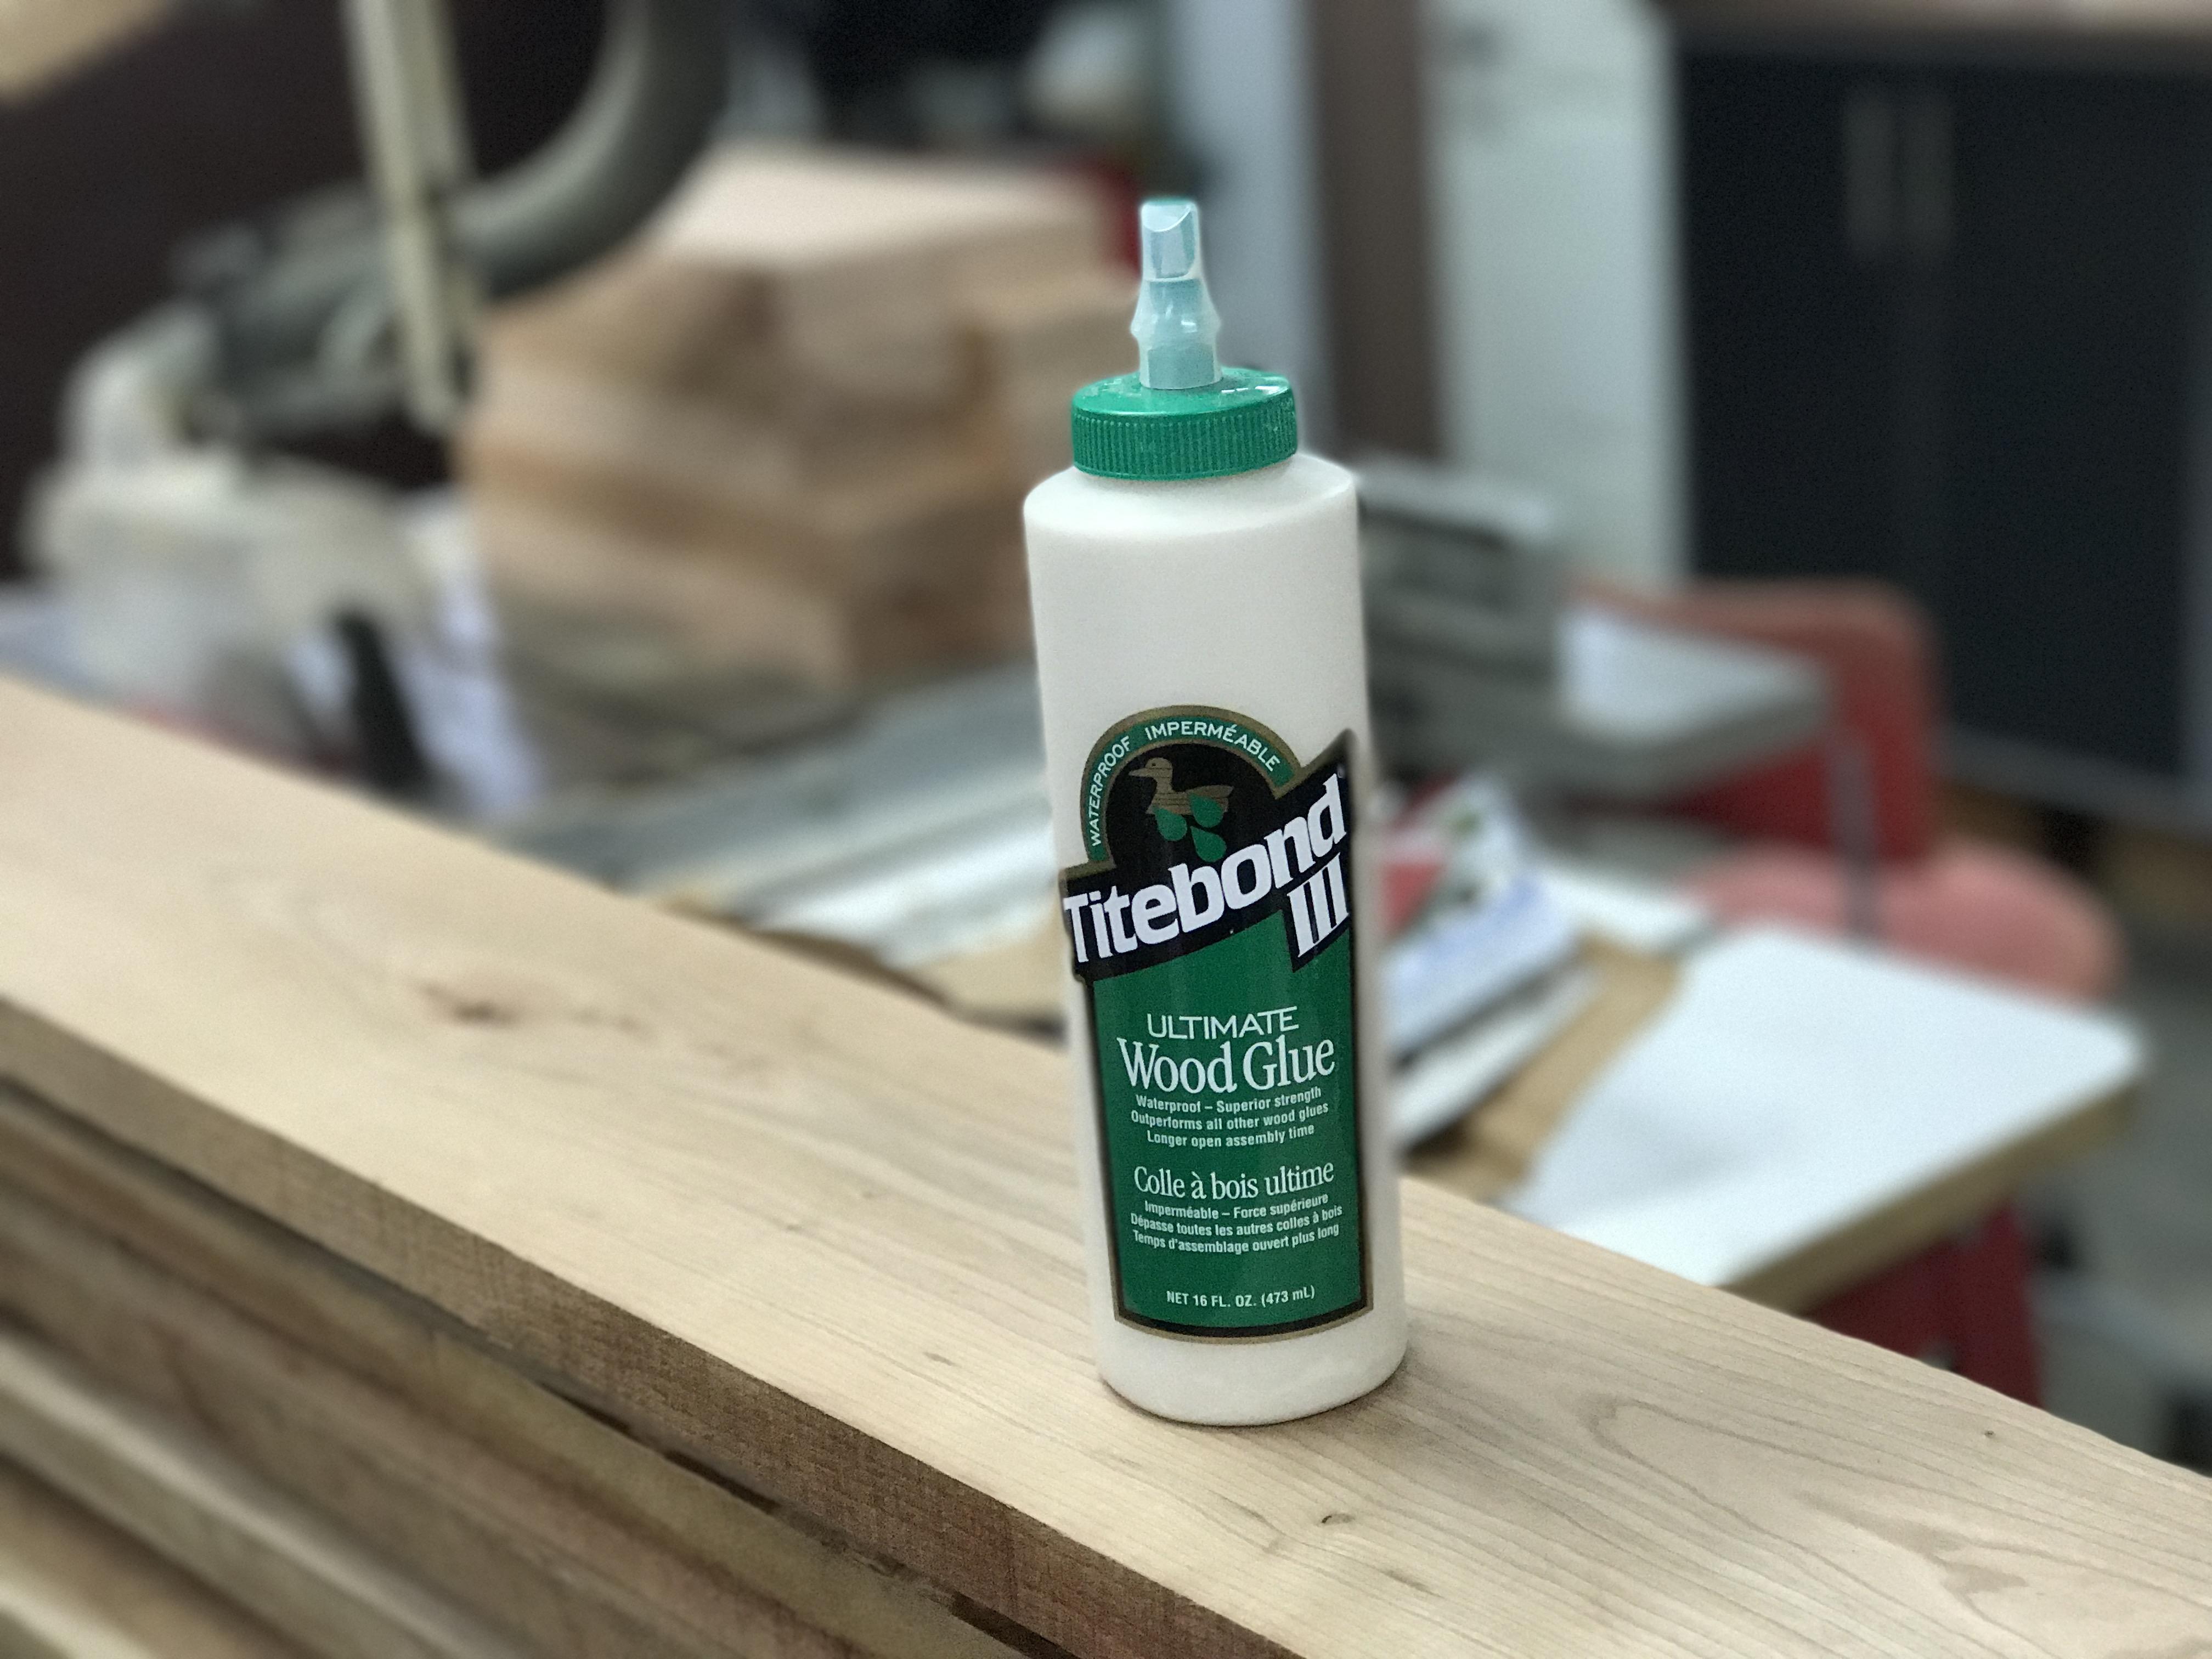 is wood glue good for outdoor use? 2